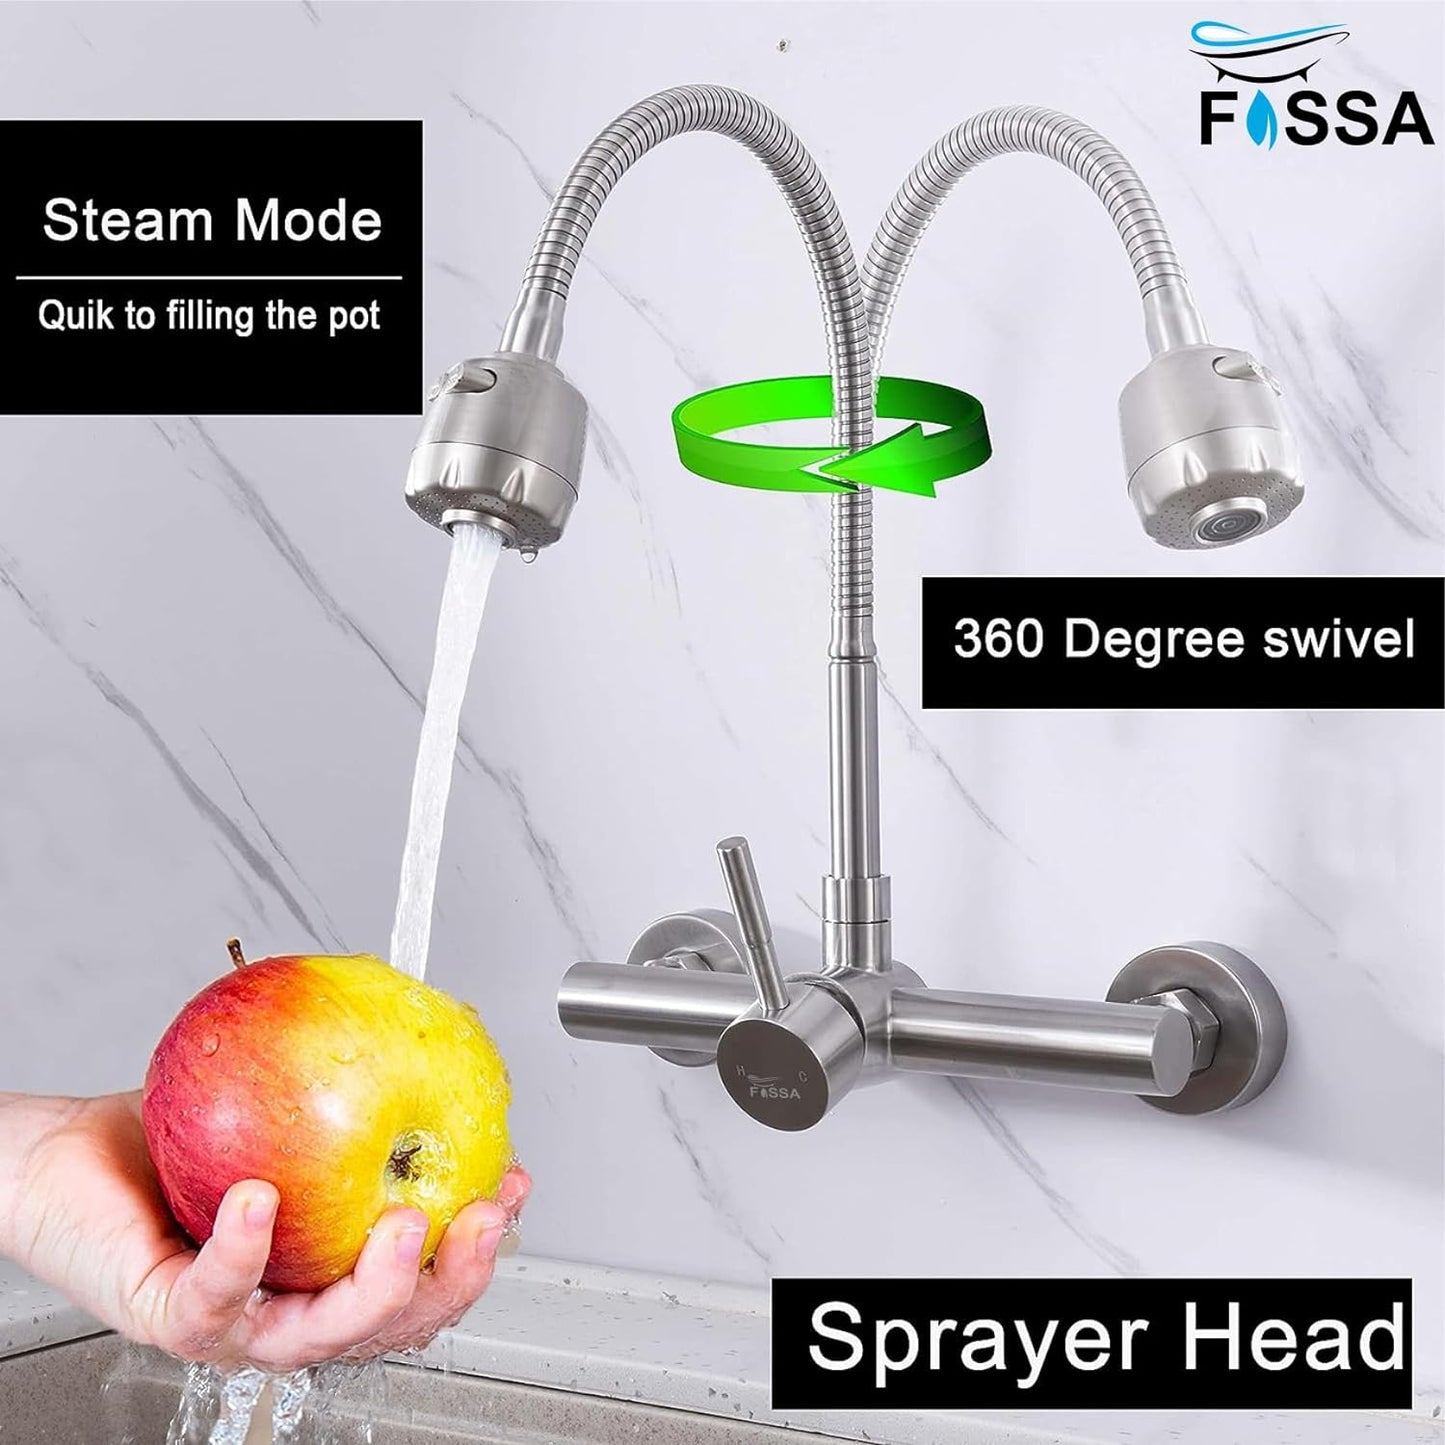 Fossa Kitchen Sink Wall Mount with Sprayer Stainless Steel Mixer Tap Faucet Fossa Home